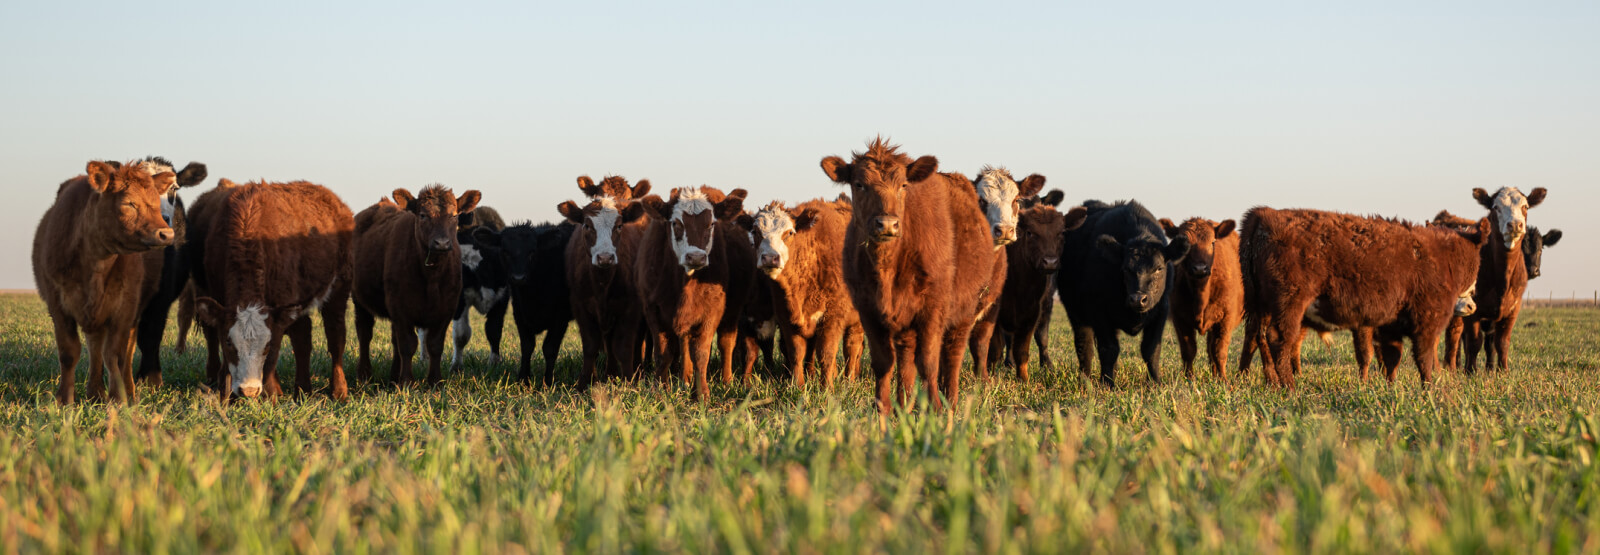 A group of cattle standing in a field